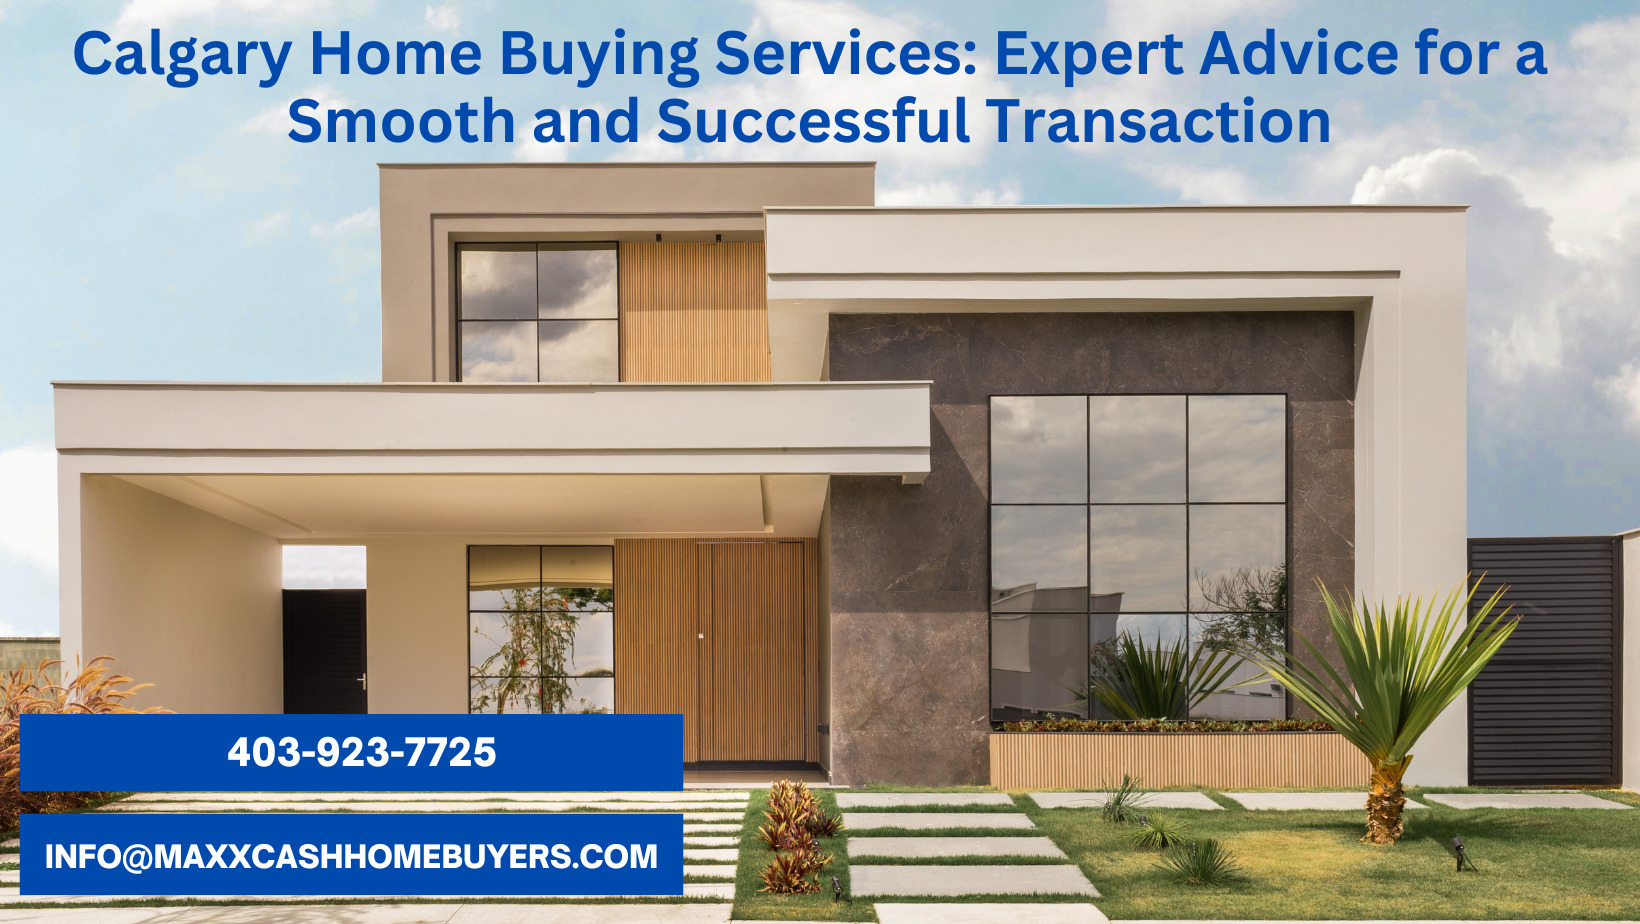 Calgary Home Buying Services: Expert Advice for a Smooth and Successful Transaction